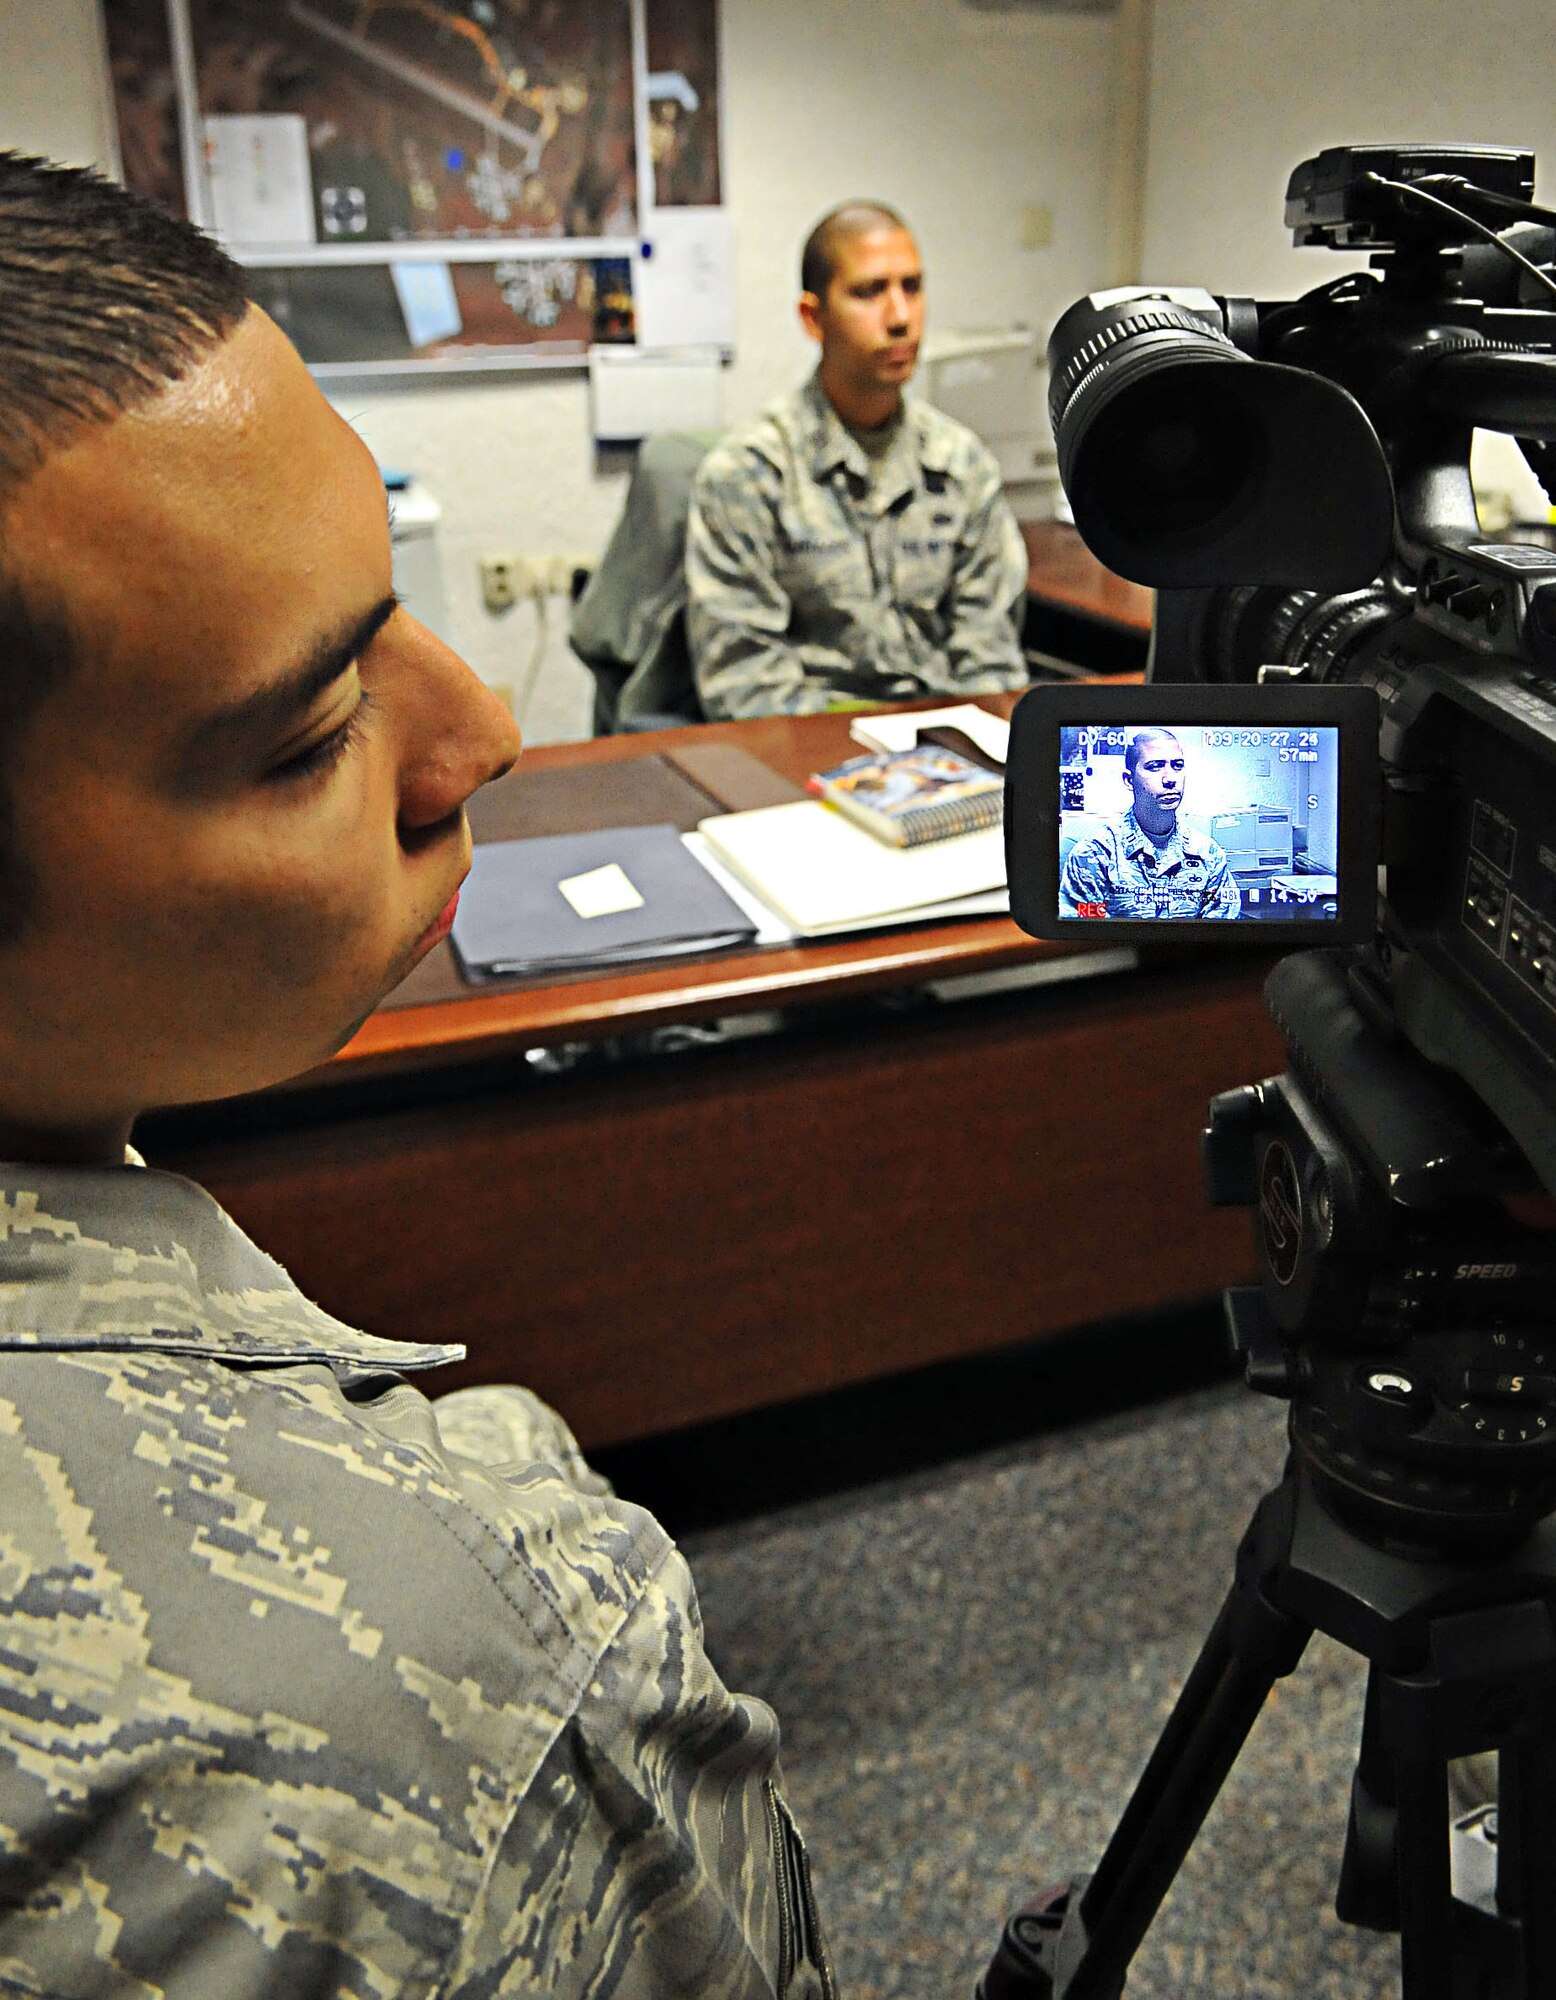 U.S. Air Force Senior Airman Esteban Esquivel, 86th Public Affairs, journalist, inspects his footage of Capt. Christopher Martagon, 86th Logistic Readiness Squadron, flight commander, during an Operation Readiness Inspection, Ramstein Air Base, Germany, Sept. 29, 2010. The ORI is designed to test Airmen's ability to survive, operate and perform fundamental duties in a war time environment. (U.S. Air Force photo by Airman 1st Class Desiree Esposito/Released)